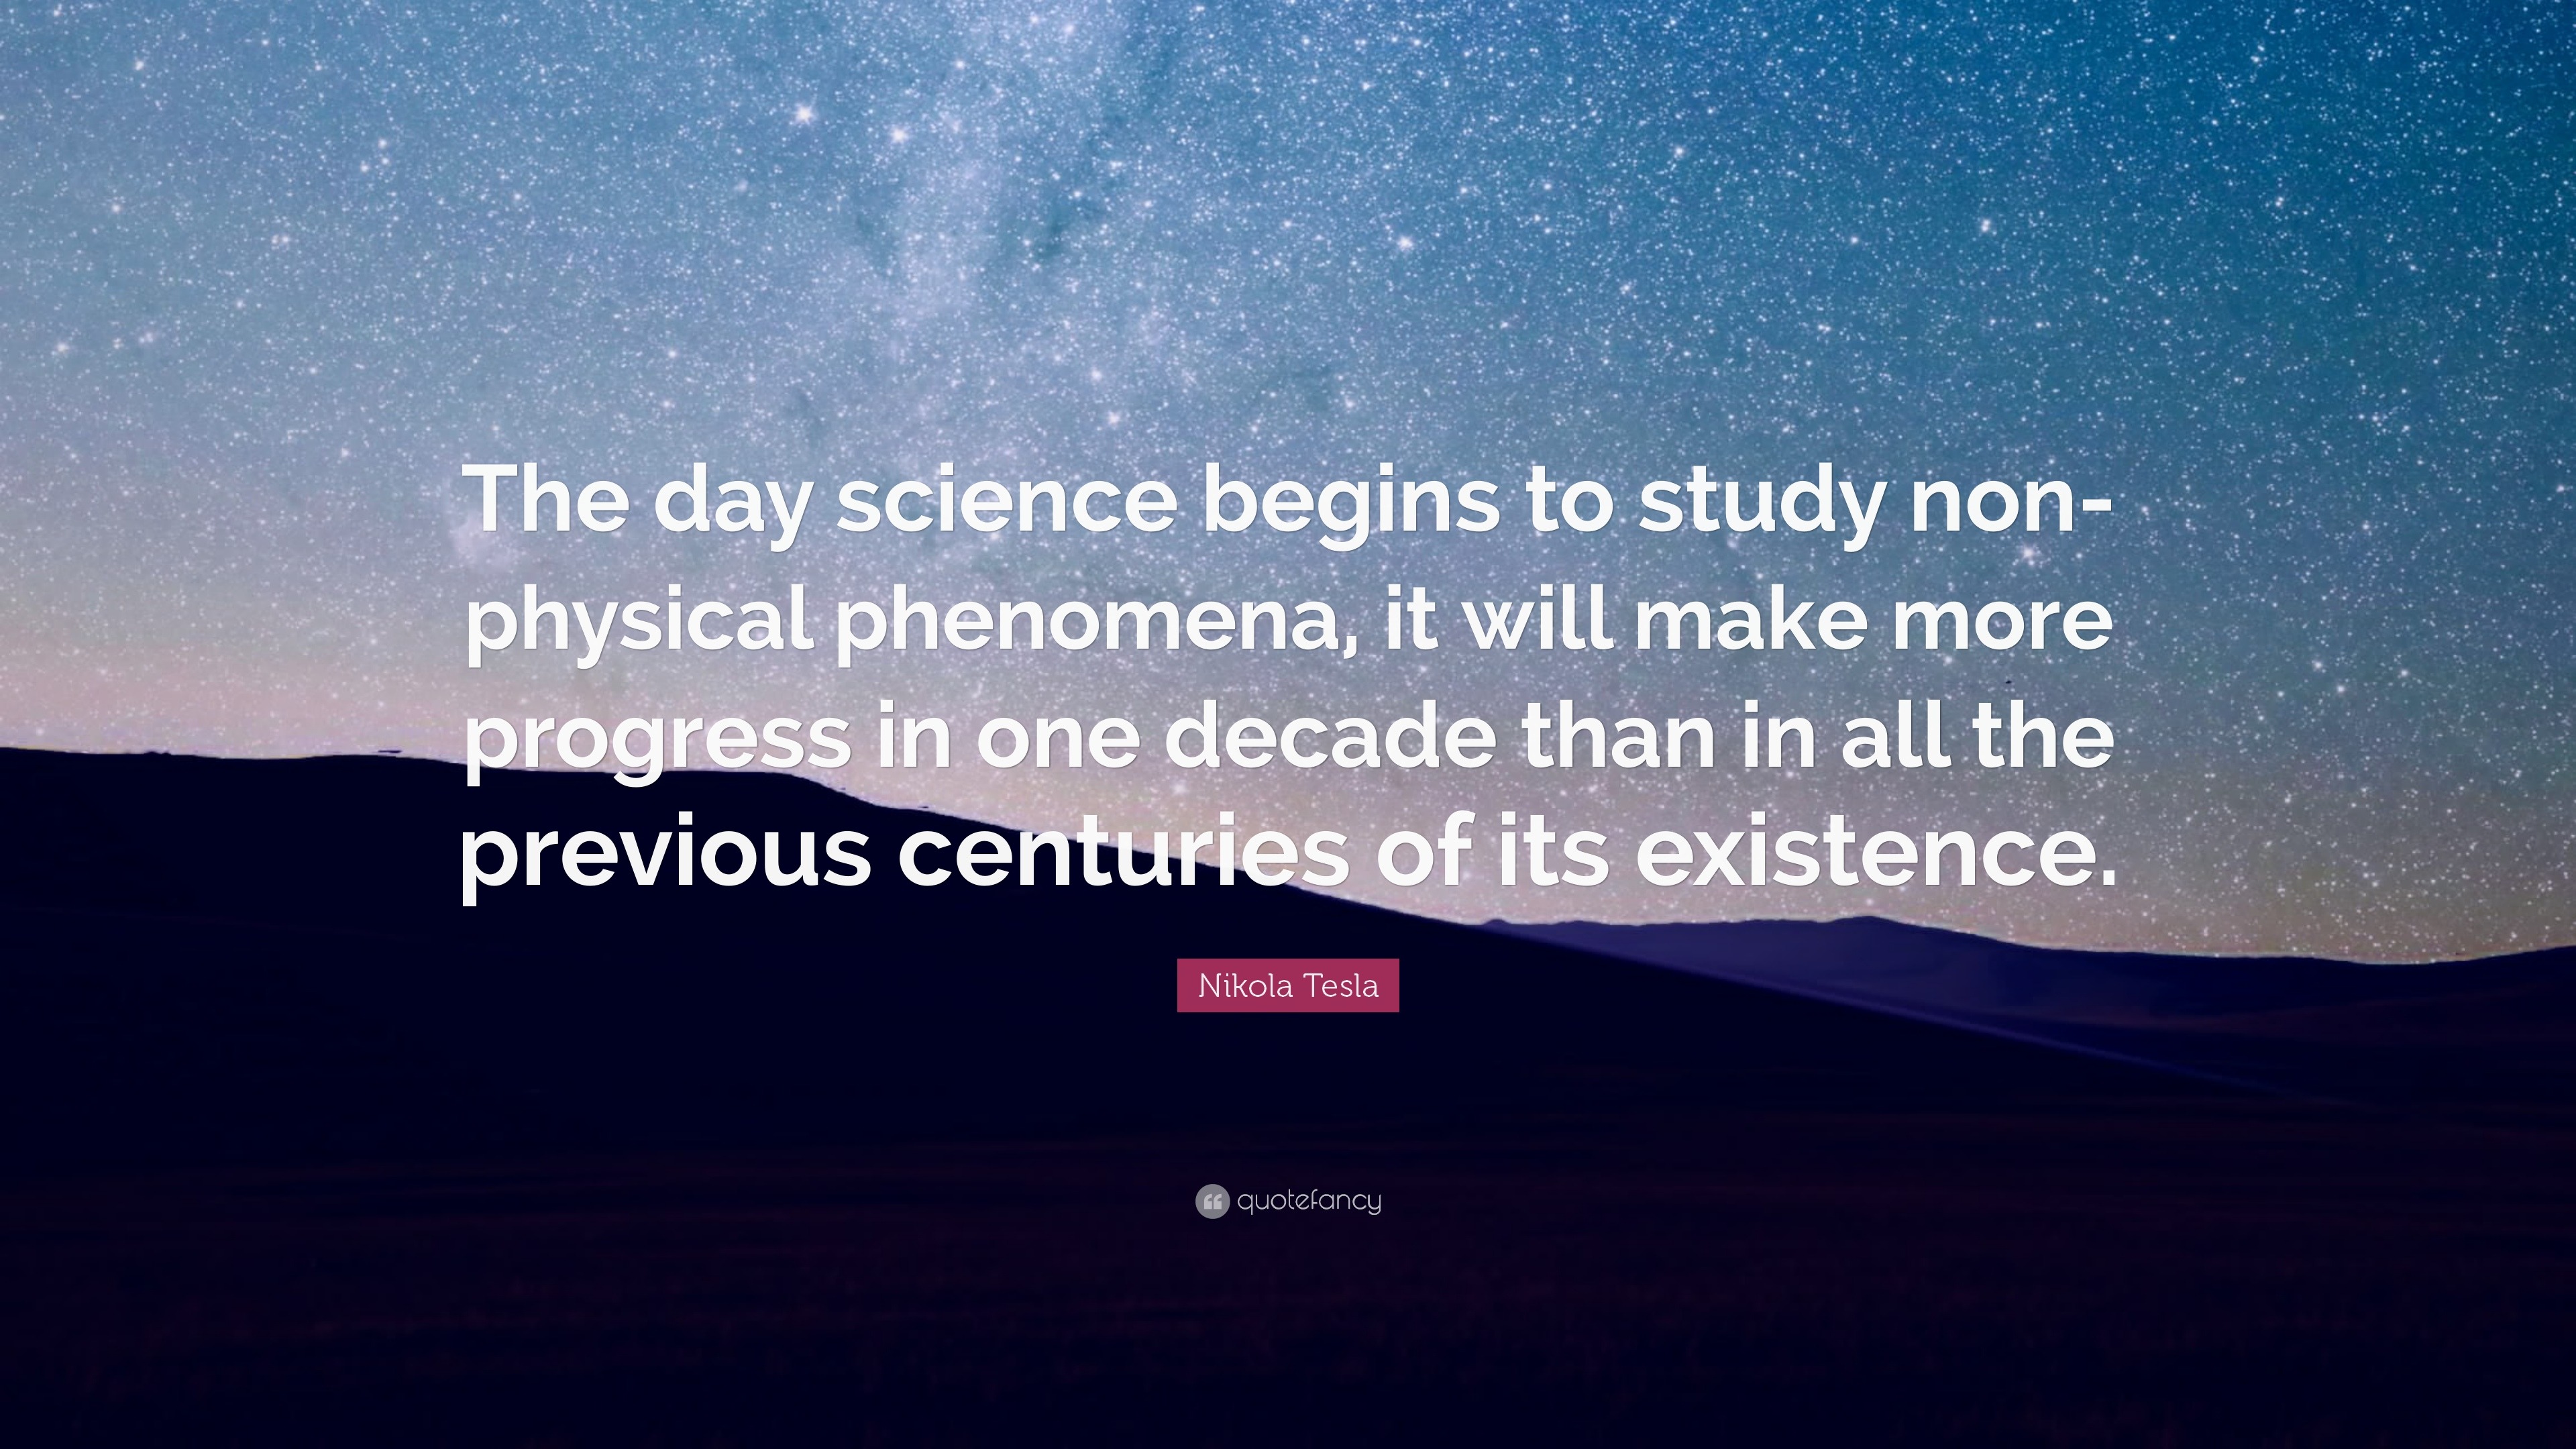 25670-Nikola-Tesla-Quote-The-day-science-begins-to-study-non-physical.jpg